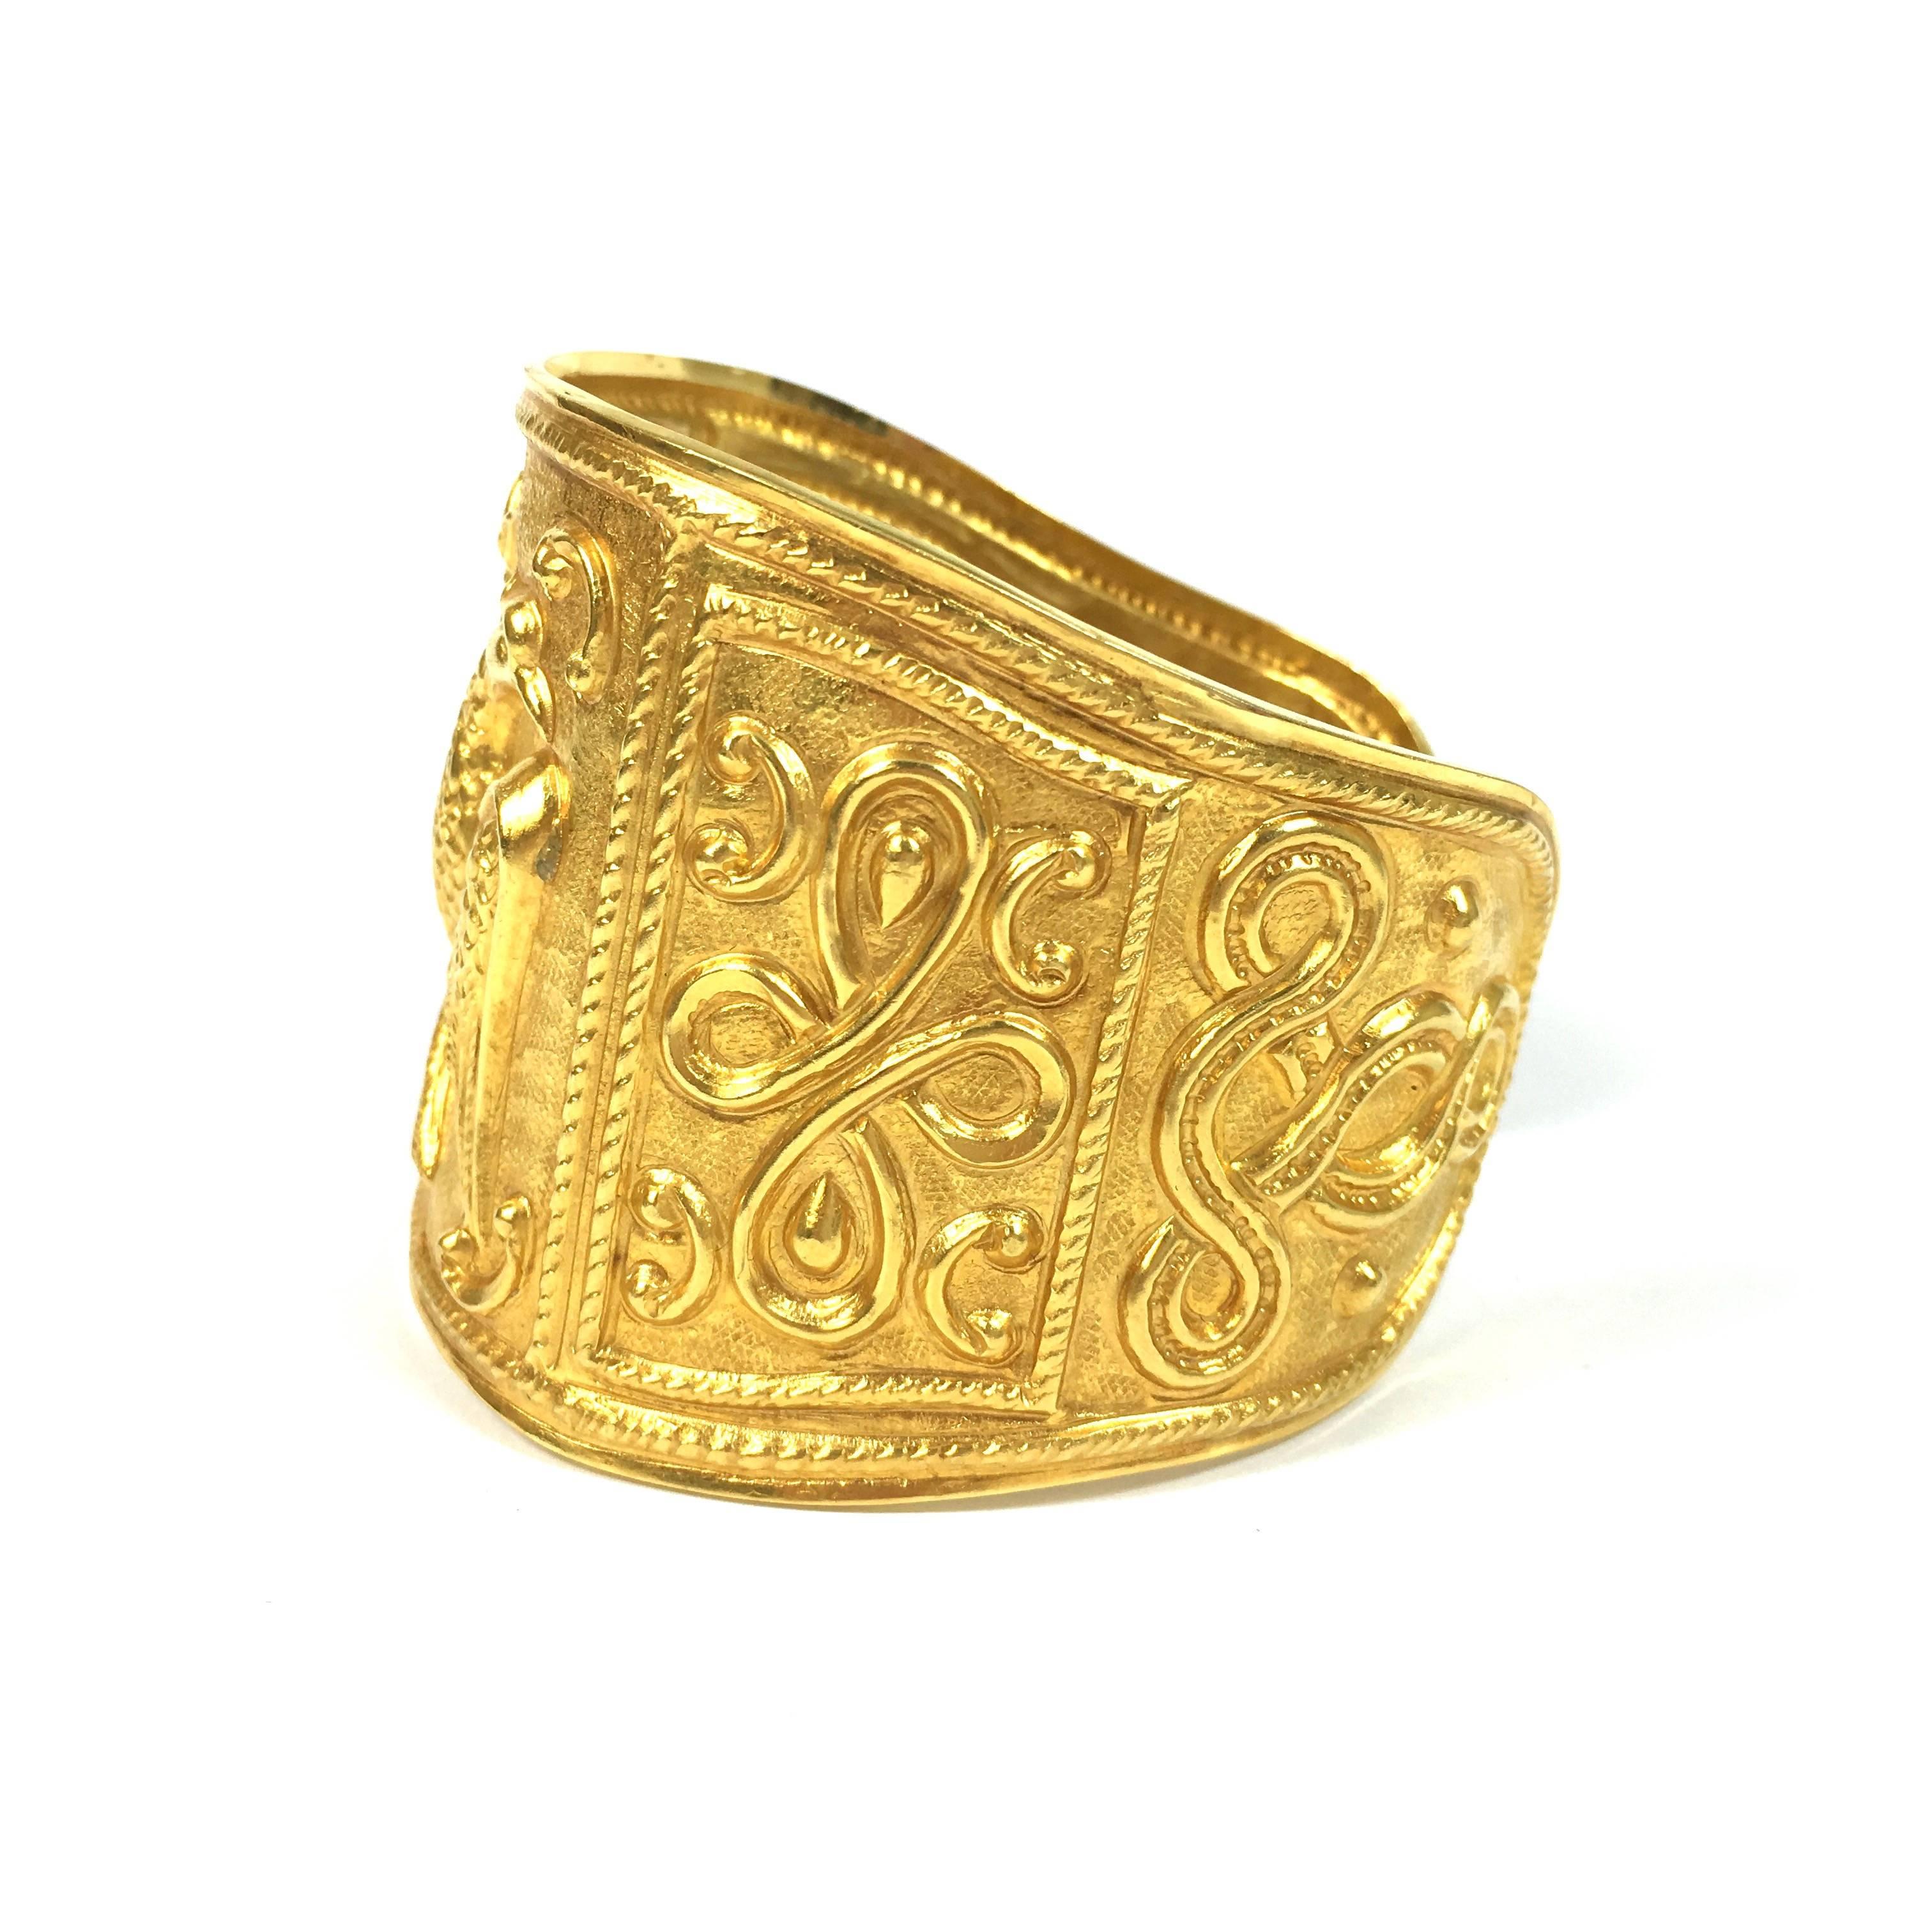 Gorgeous 22K gold cuff bracelet, measuring 53 mm on the front. 
Weight: 51.8 grams